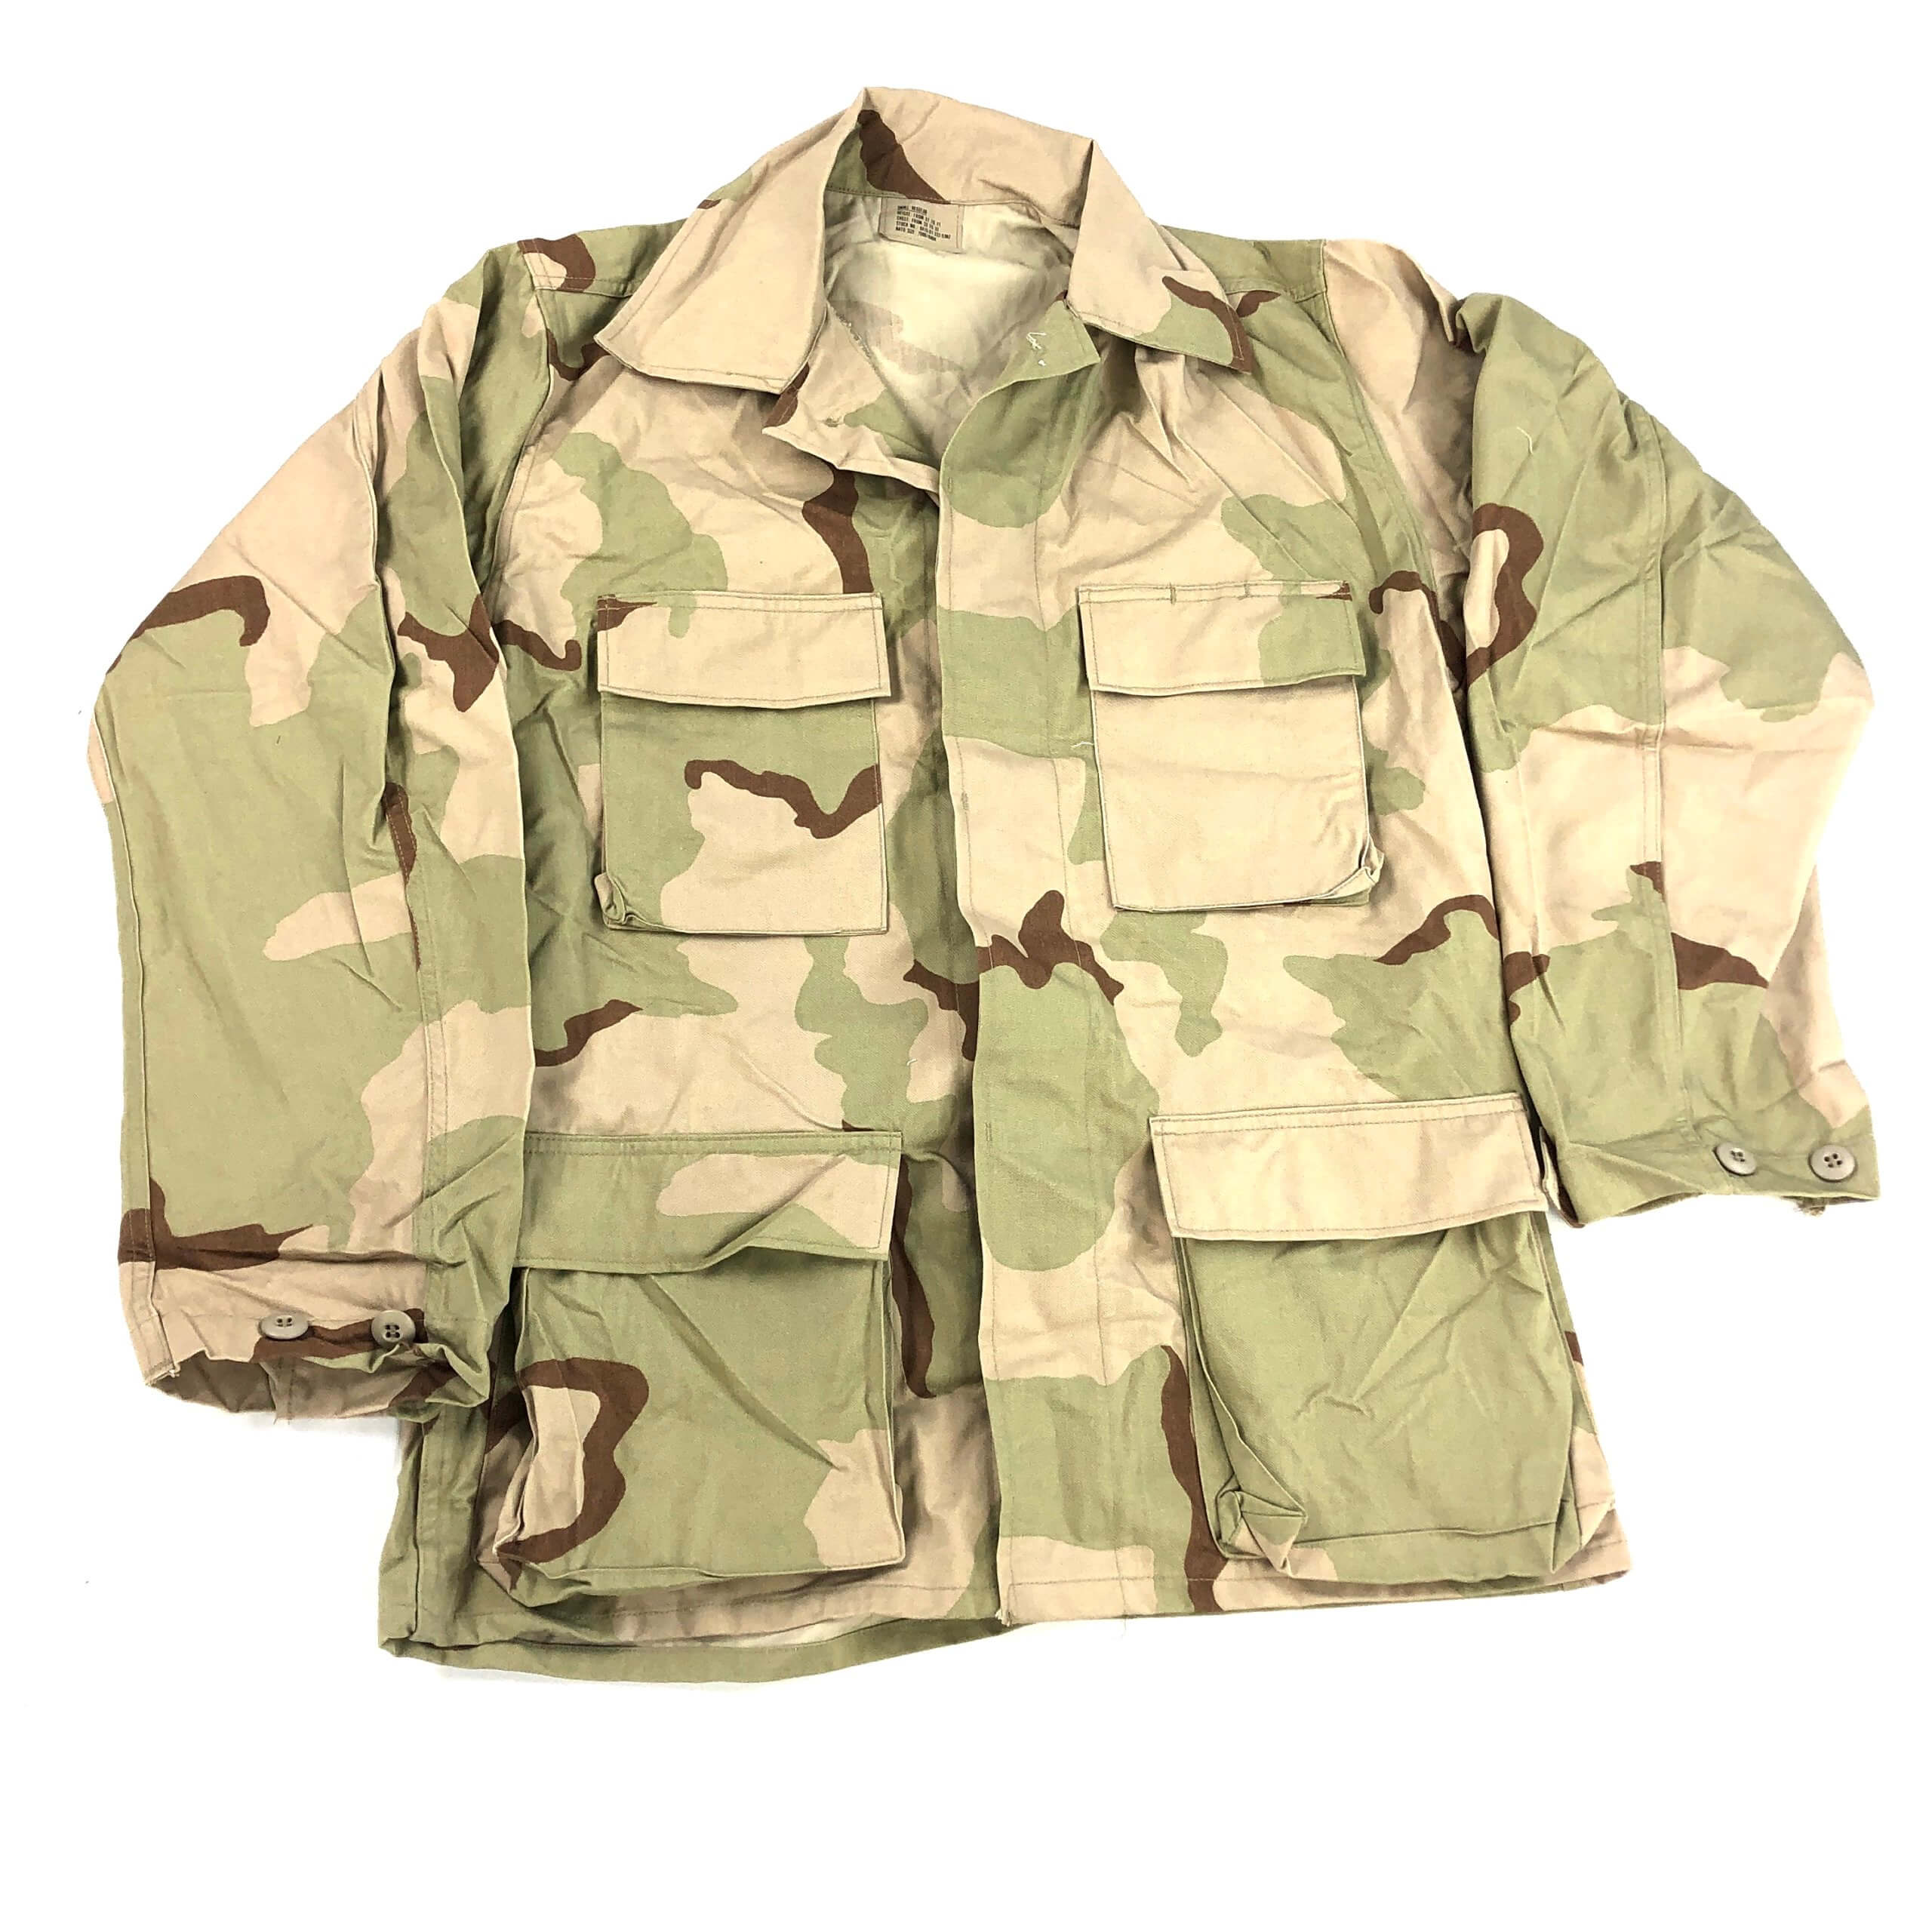 MILITARY ARMY 3 COLOR DCU DESERT SHIRT COMBAT UNIFORM RIPSTOP OR WINTER NEW